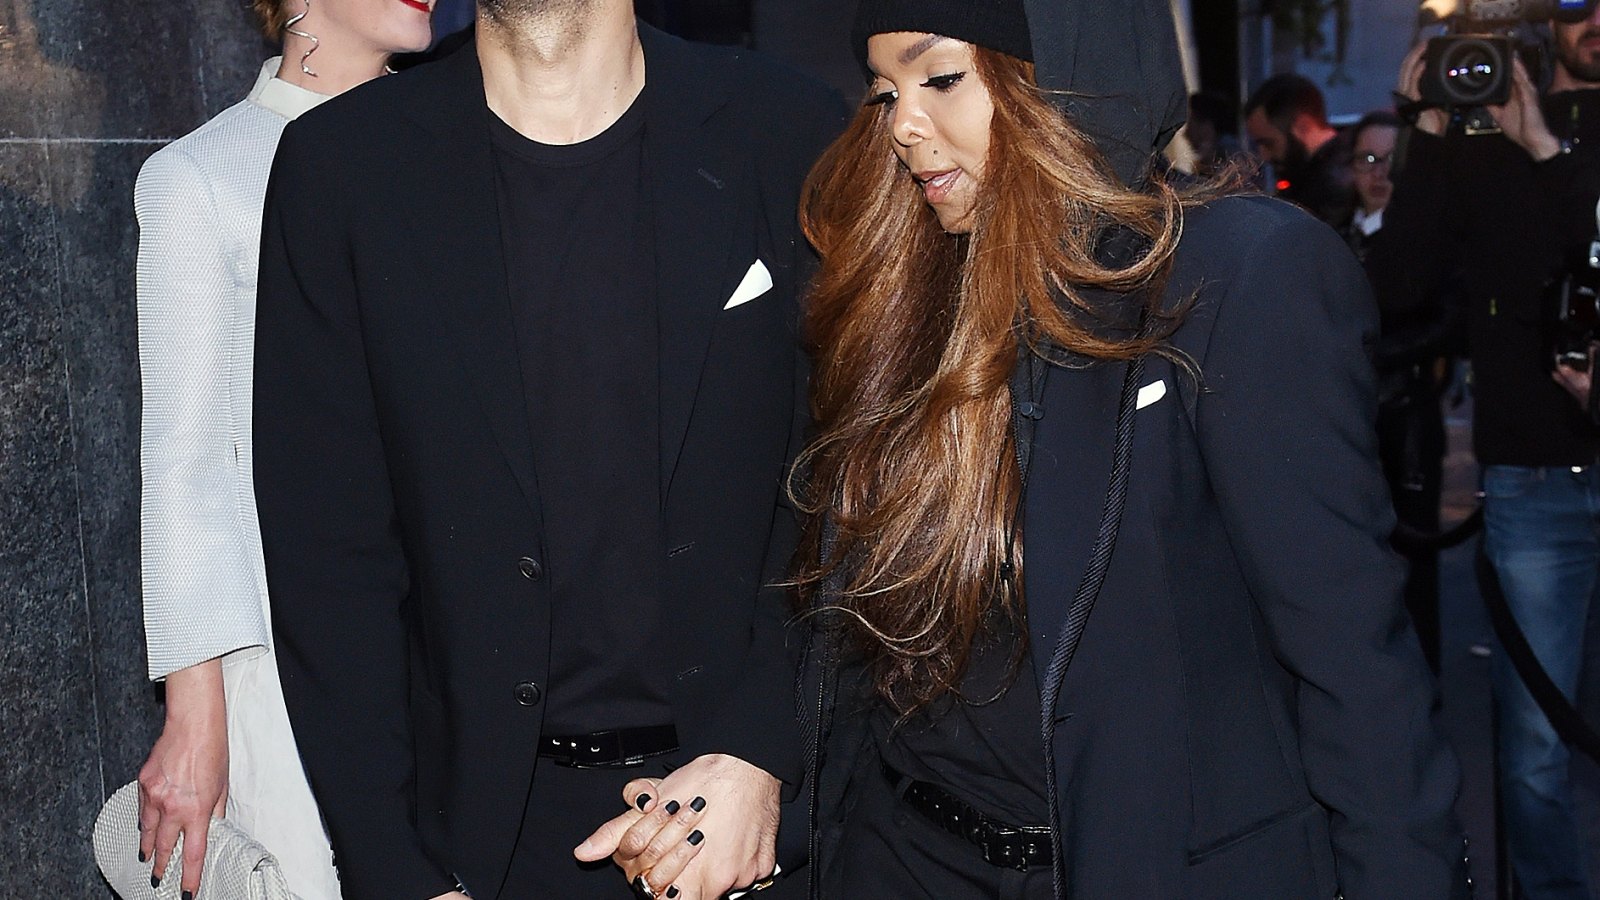 Wissam Al Mana and Janet Jackson in Milan on April 29, 2015